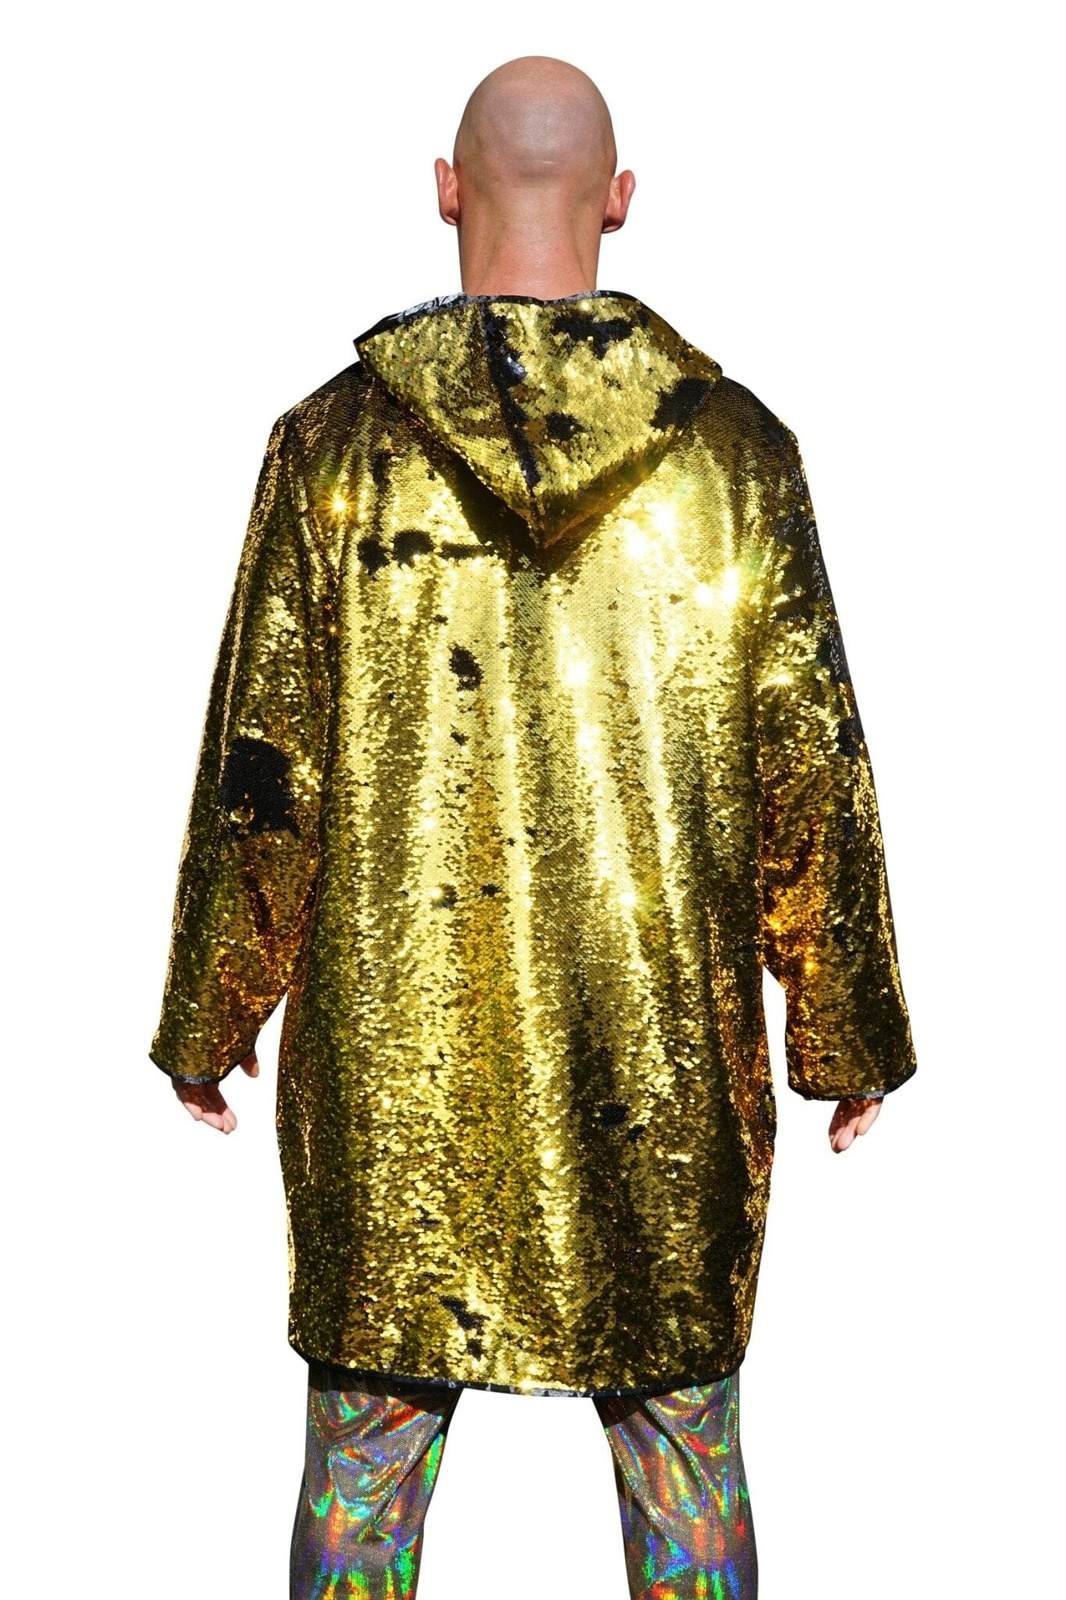 Gold Sequin Hoodie Jacket from Love Khaos Festival Clothing Brand